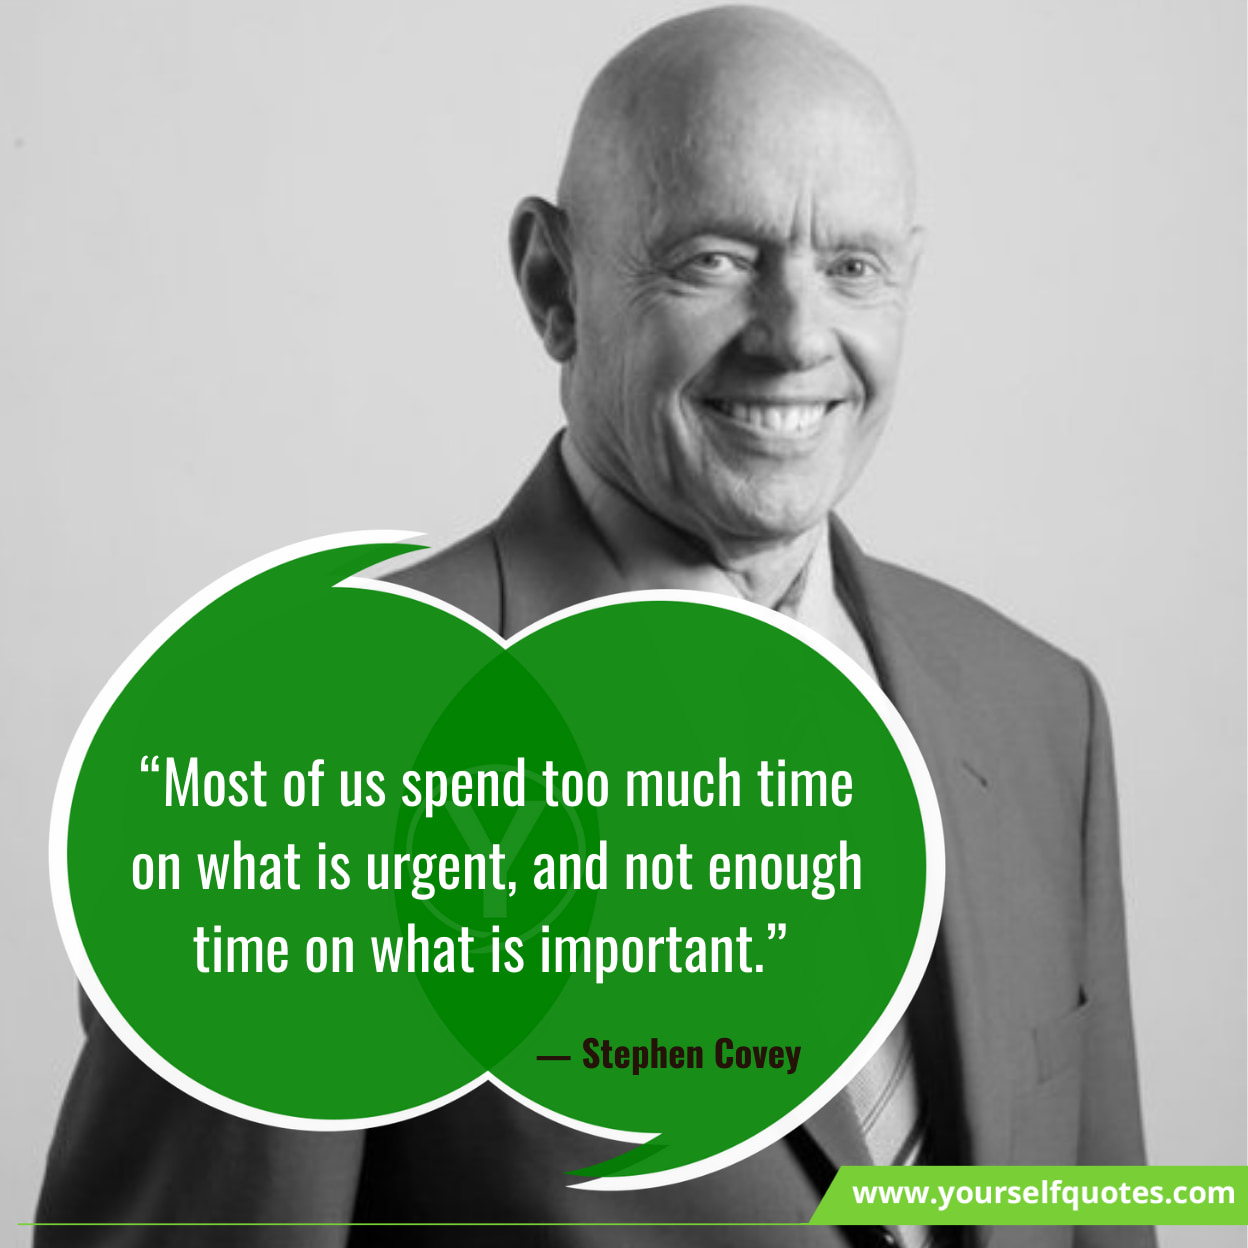 Time Management Quotes About Life